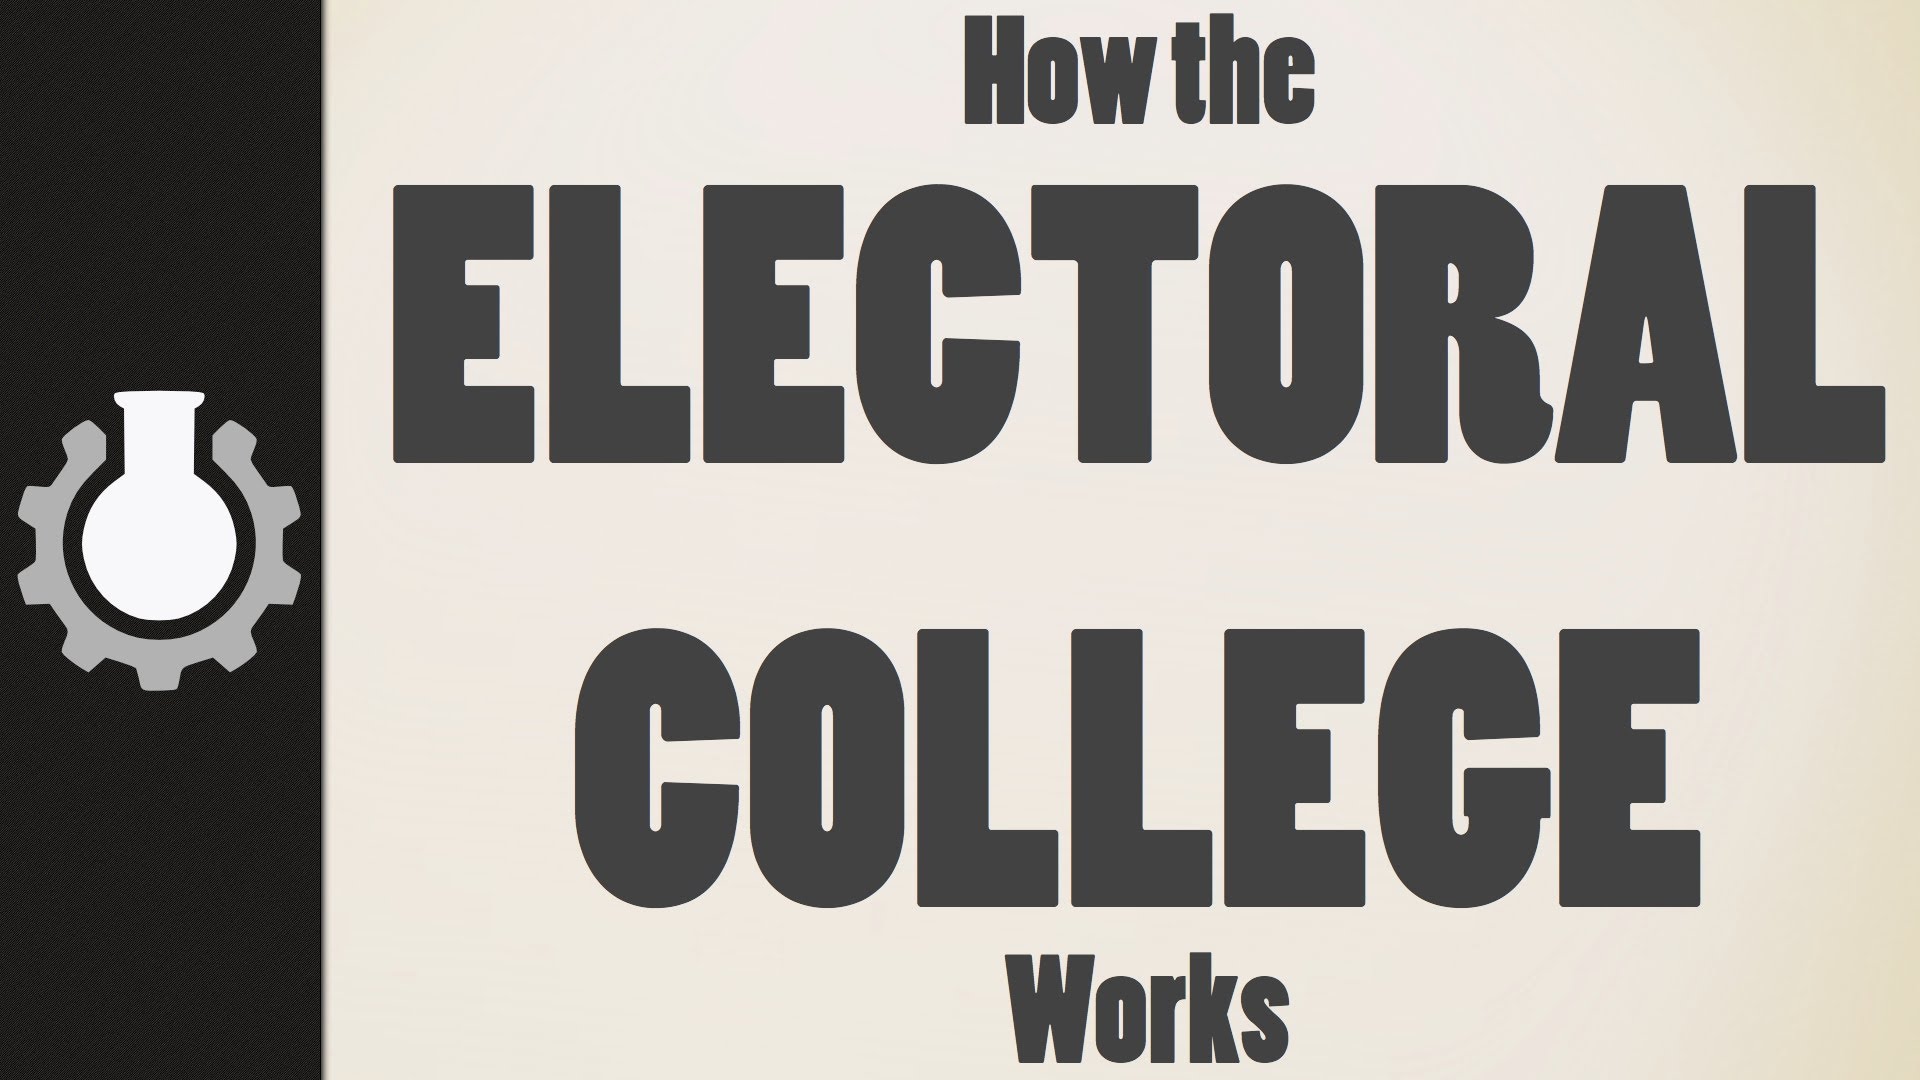 Two cheers for the Electoral College: Reasons not to abolish it